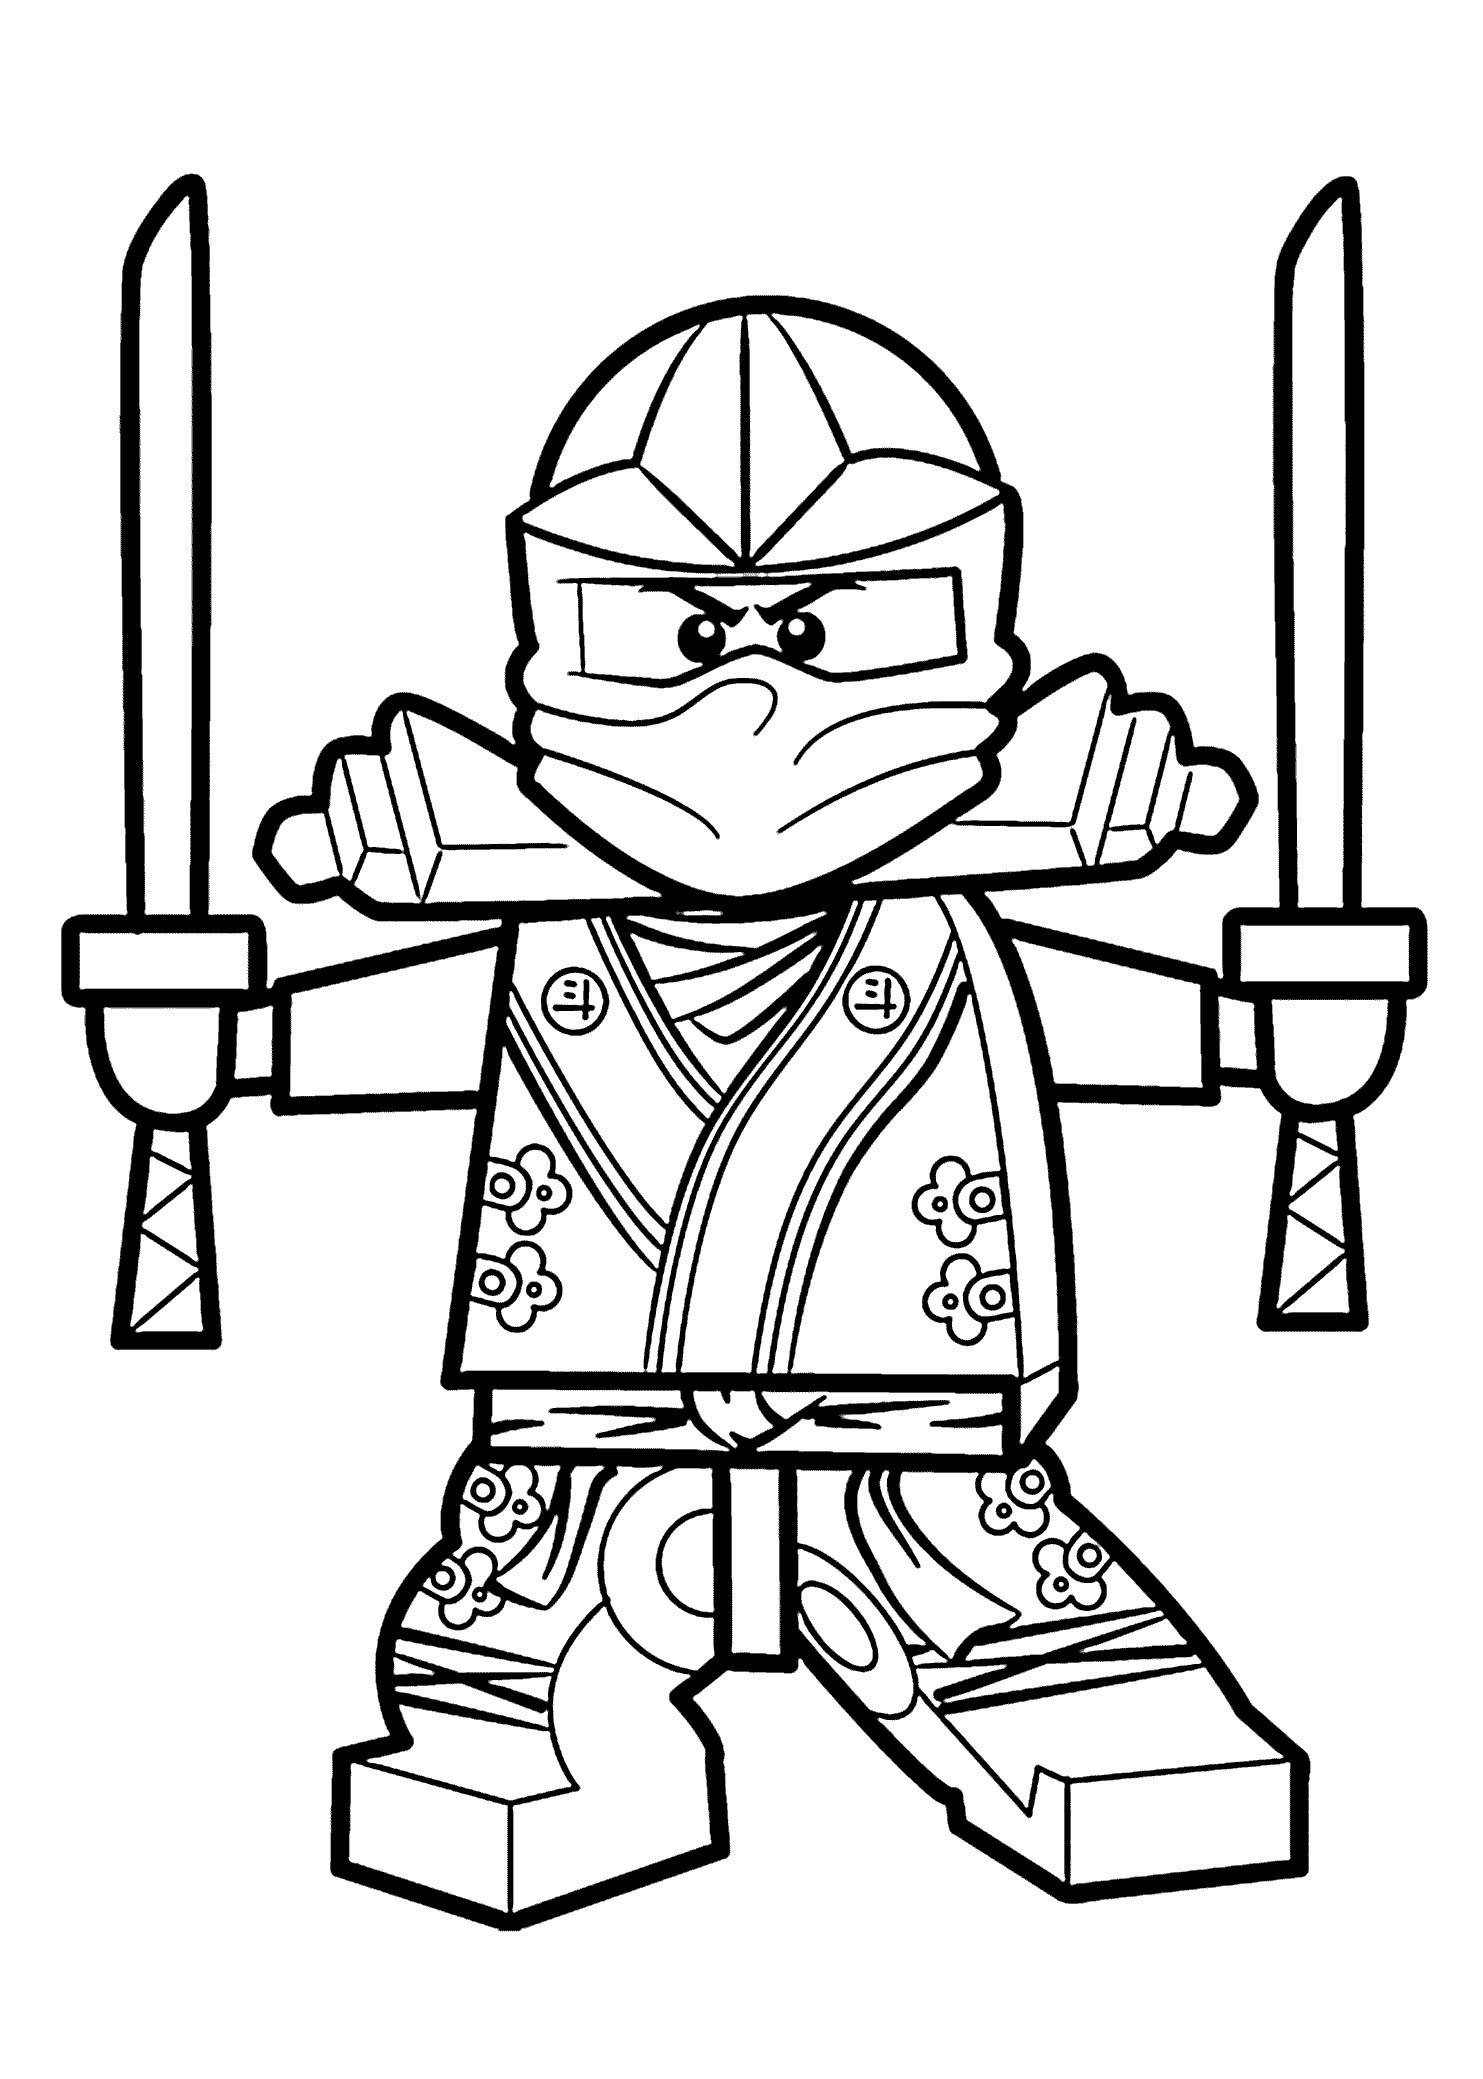 Coloring Pages For Boys Lego
 Lego Coloring Pages Best Coloring Pages For Kids